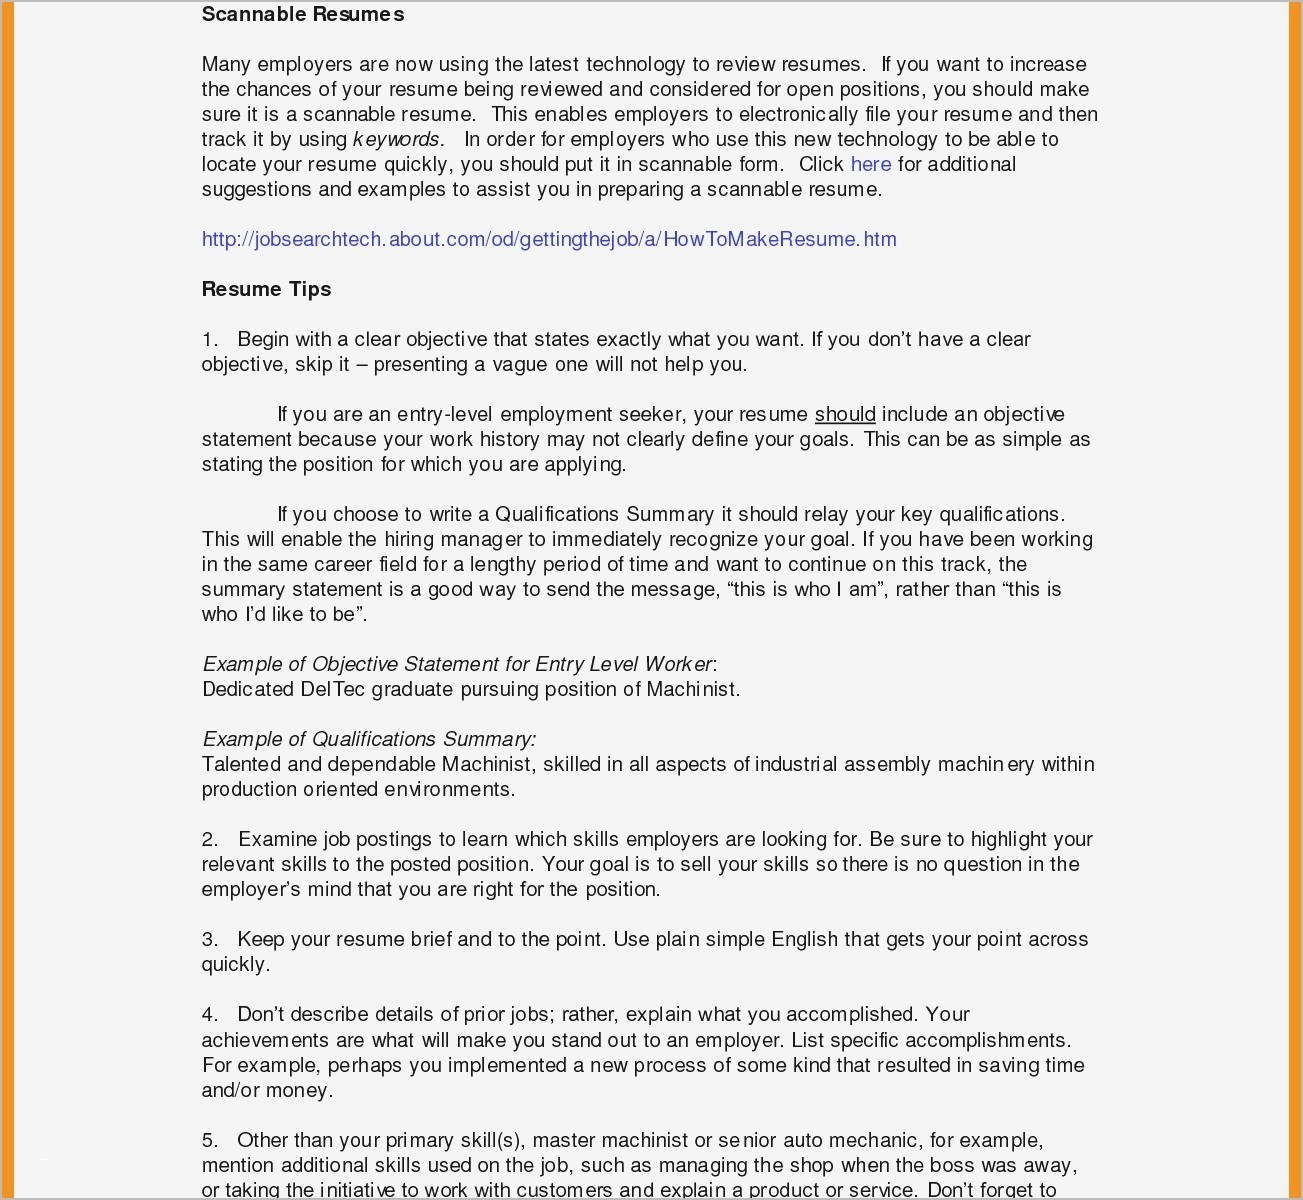 Resume Objective Statement Sample Resume Objective Statements For High School Students Beautiful Photos Great Objectives For Resumes Unique 16 Beautiful High School Student Of Sample Resume Objective resume objective statement|wikiresume.com